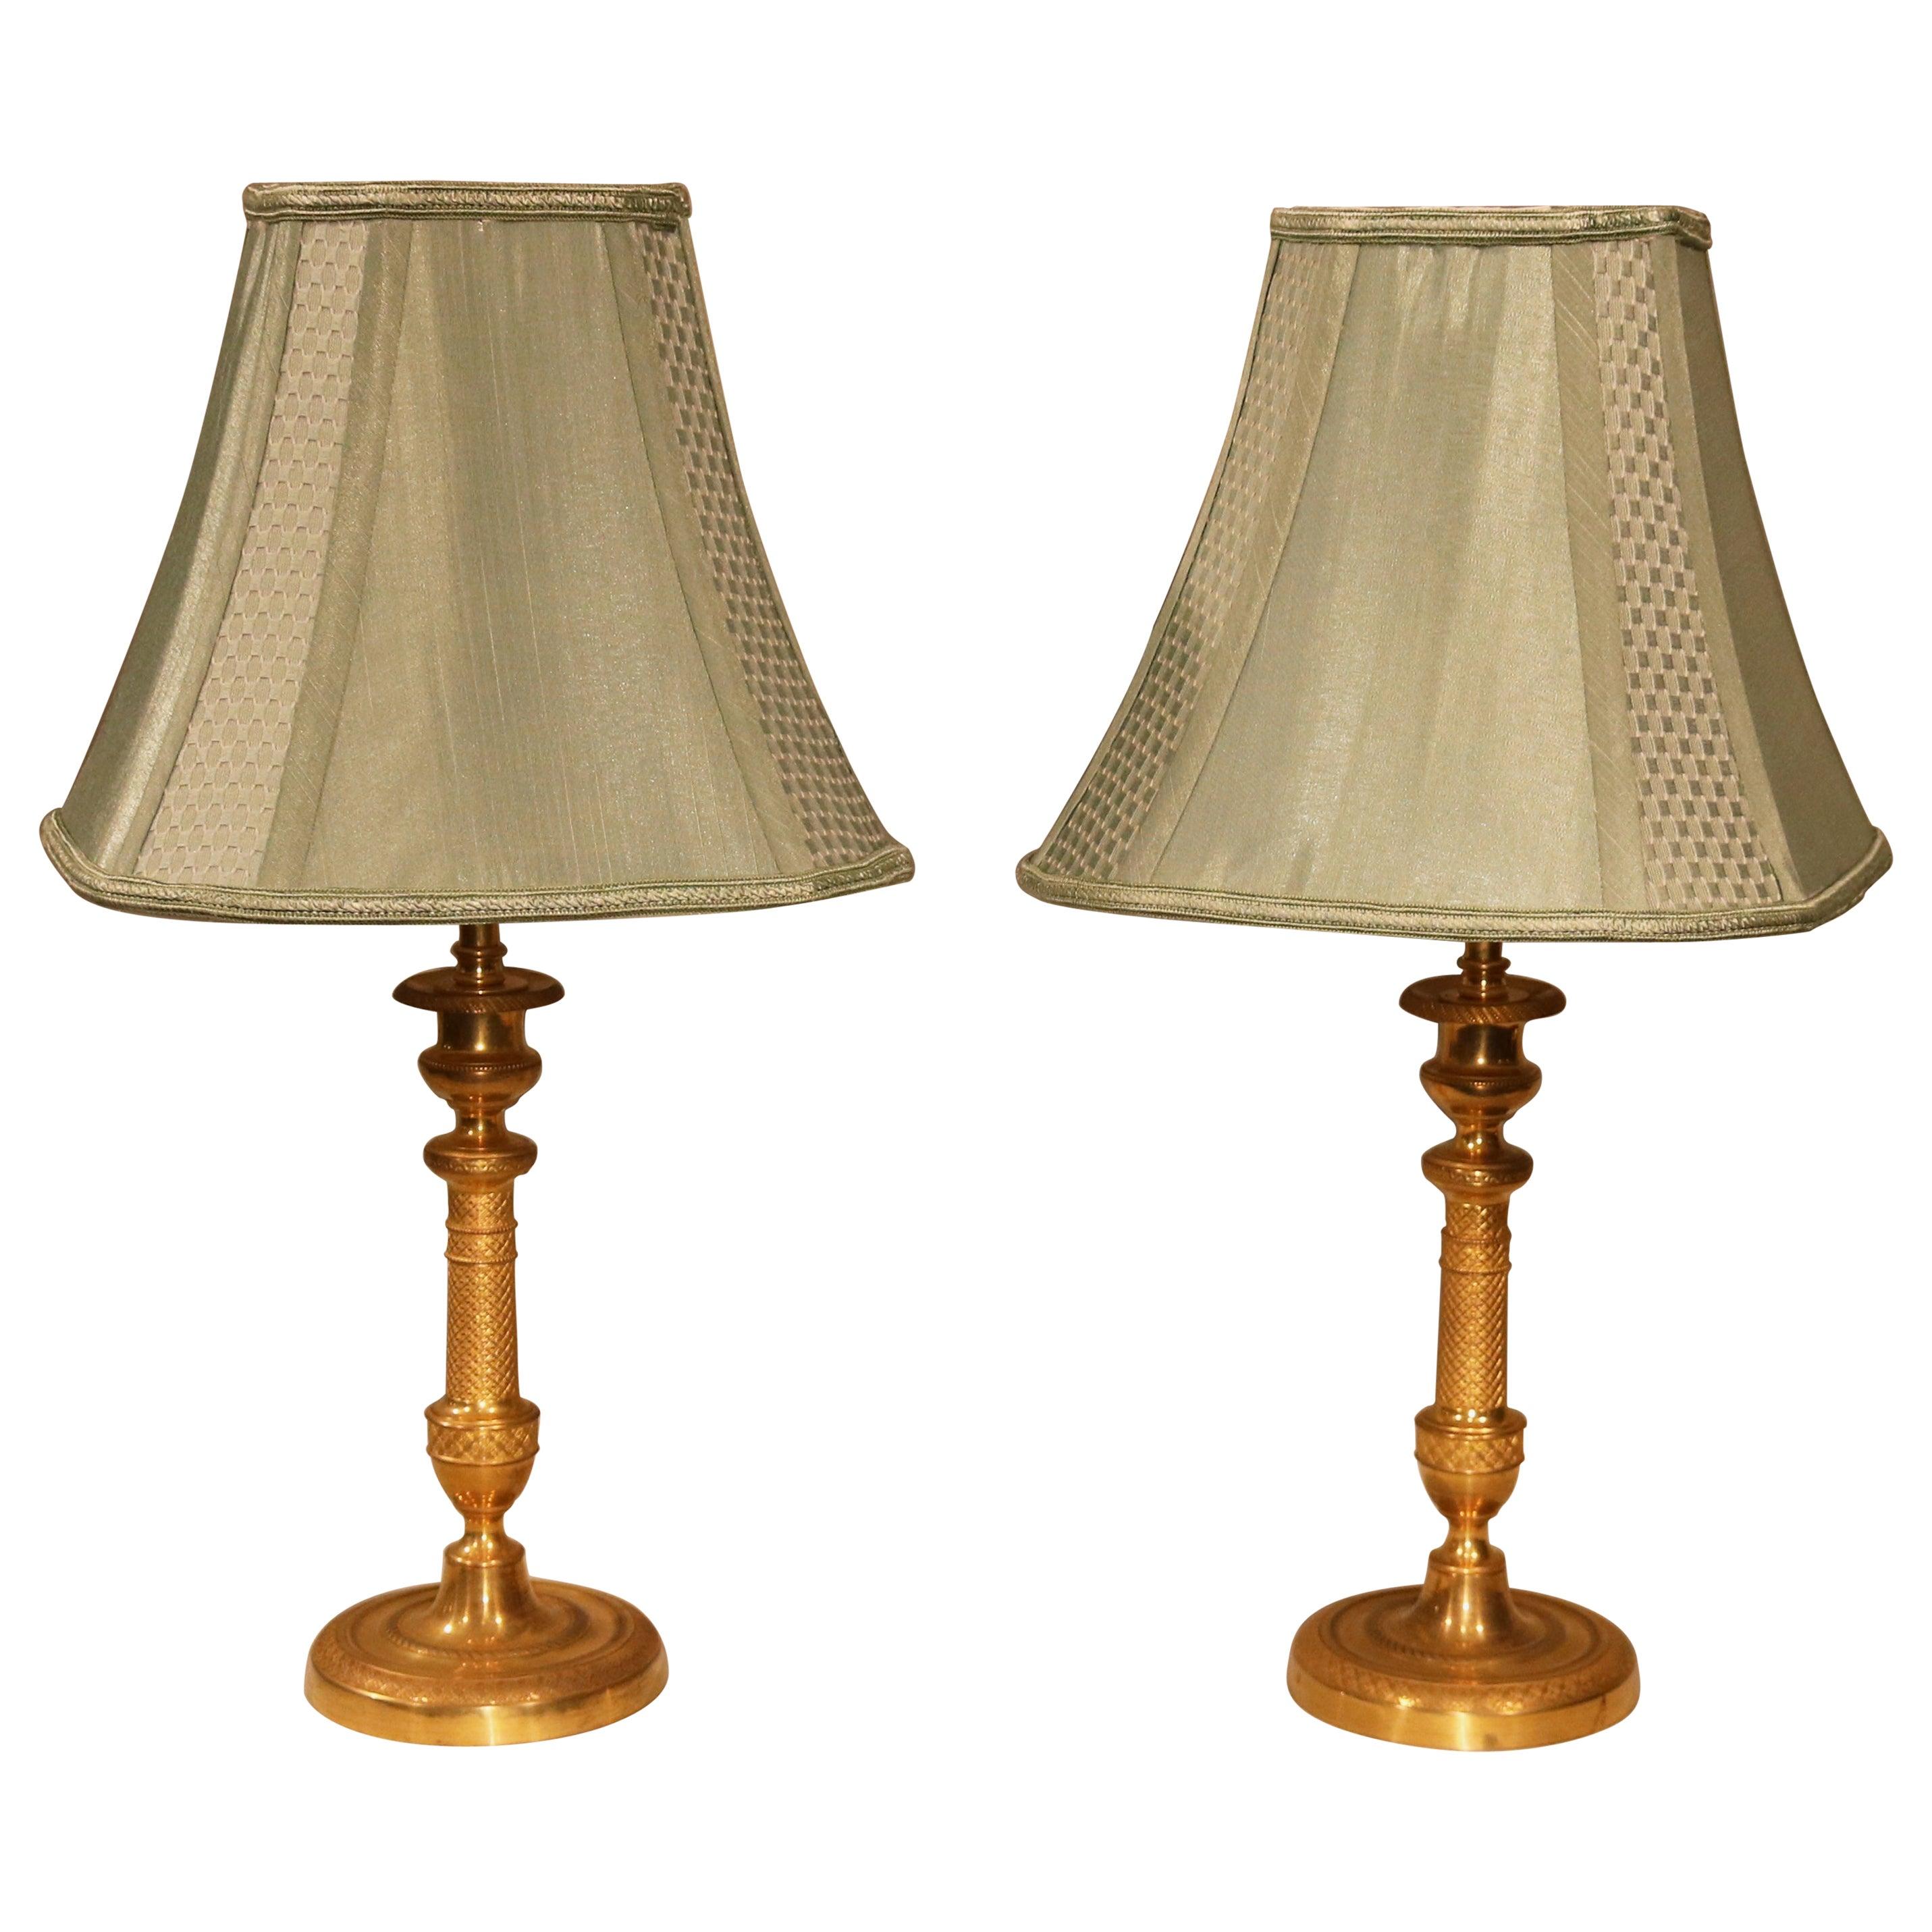 Pair of Mid-19th Century Ormolu Candlestick Lamps For Sale